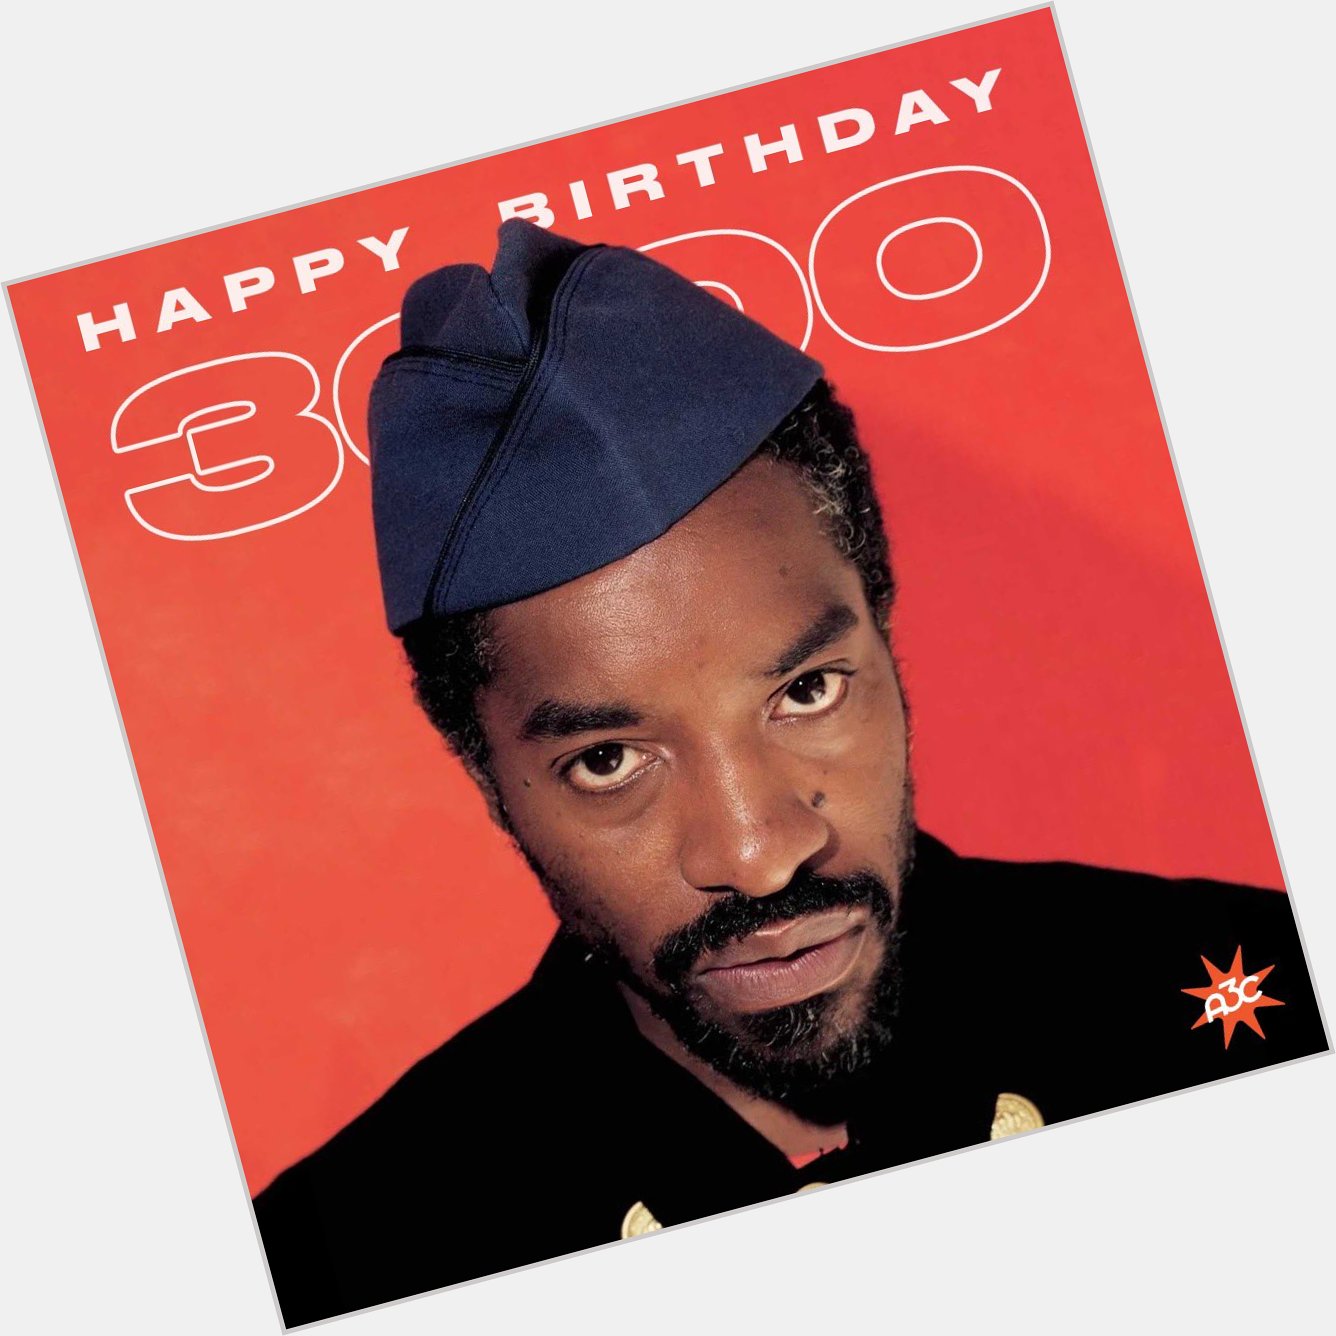 Happy Birthday, André Benjamin. What is your favorite 3000 track about love? 